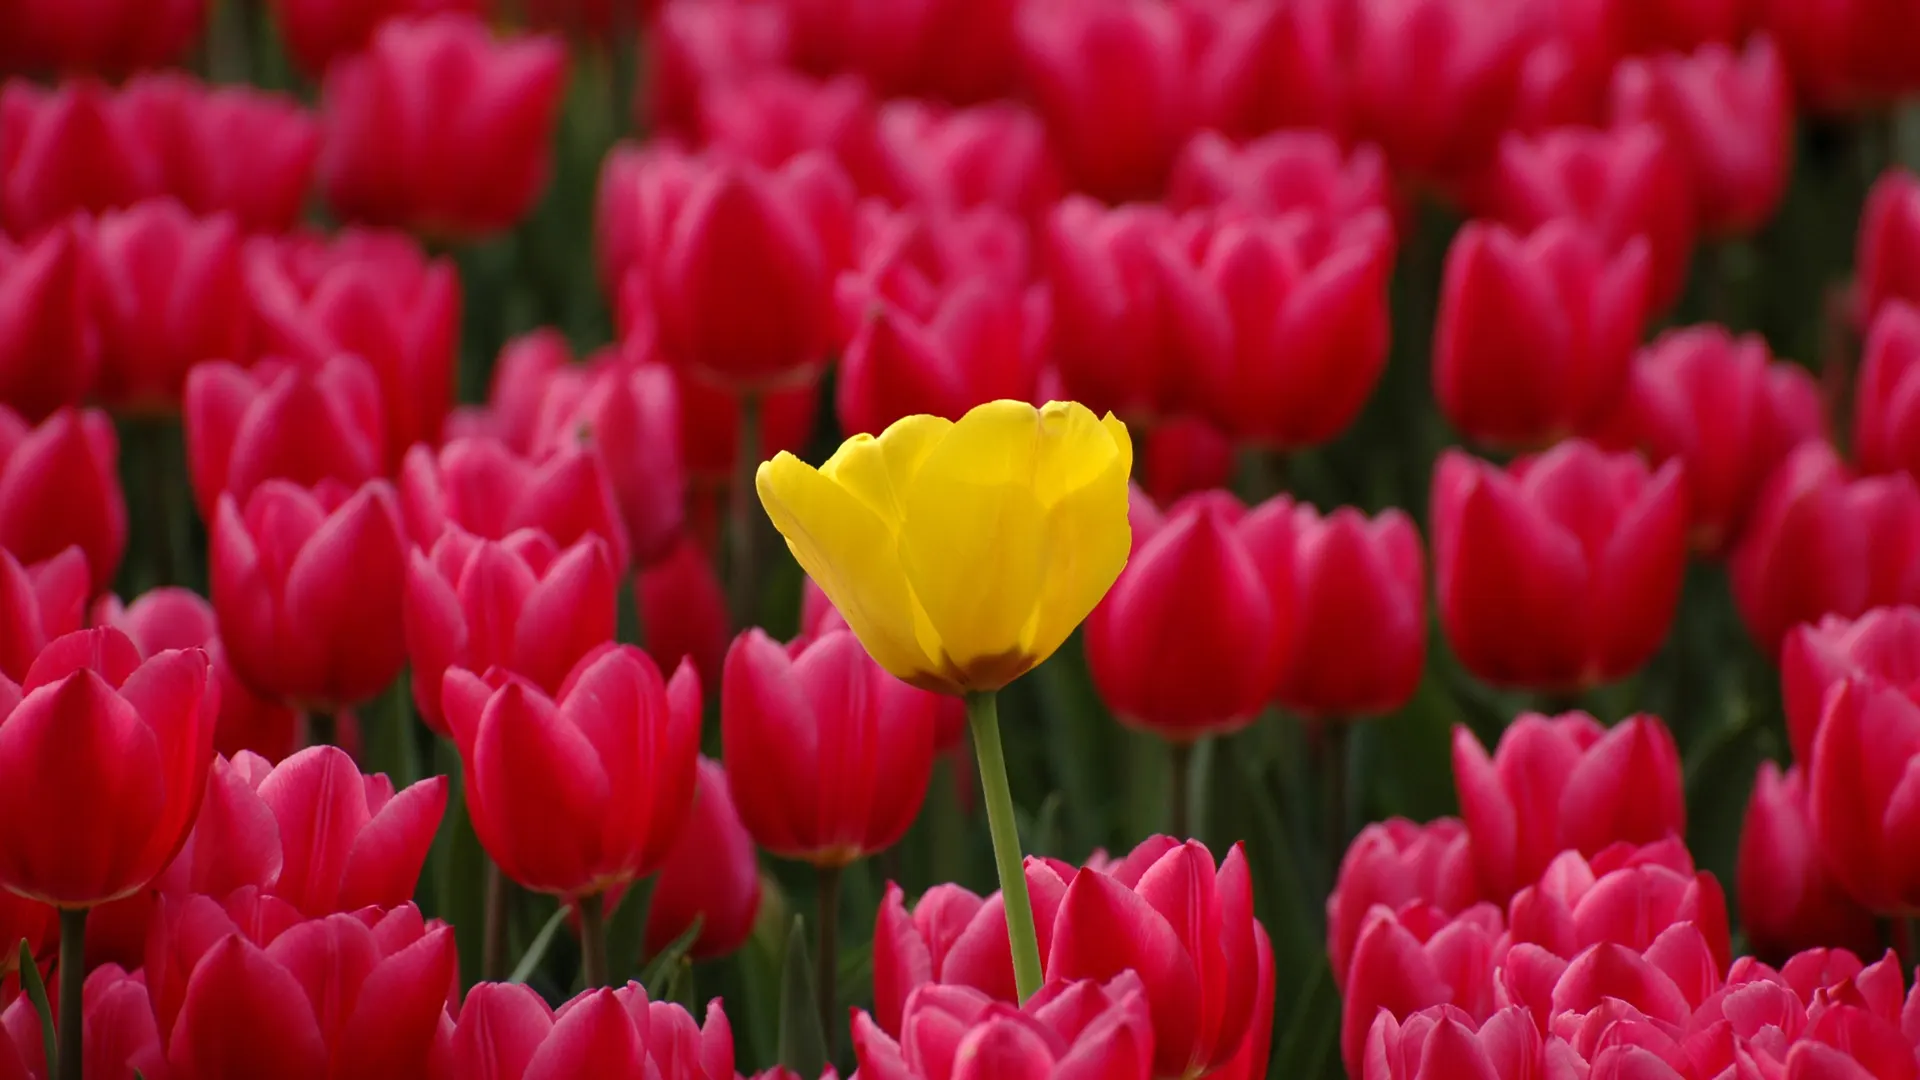 One yellow tulip in a field of red tulips.